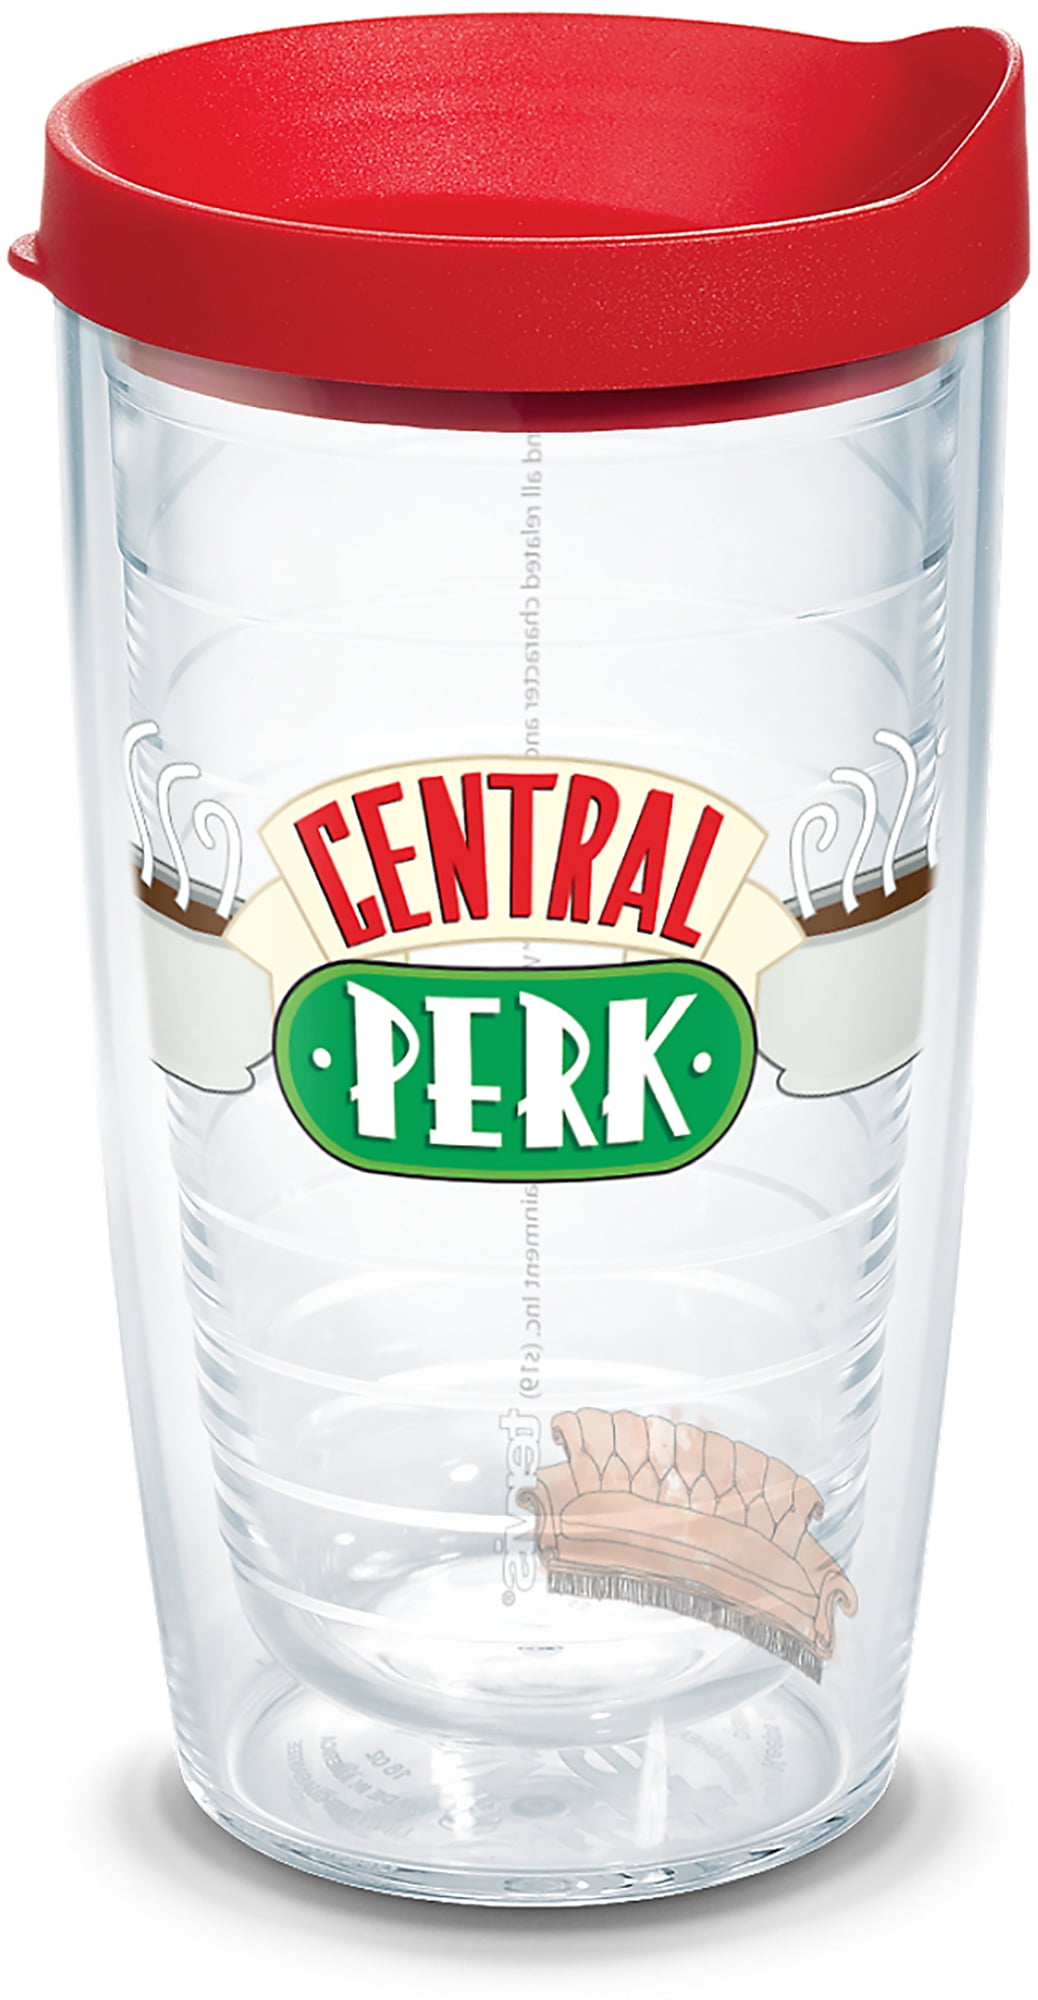 FRIENDS TV SHOW CENTRAL PERK ACRYLIC TRAVEL TUMBLER Straw Cup NEW